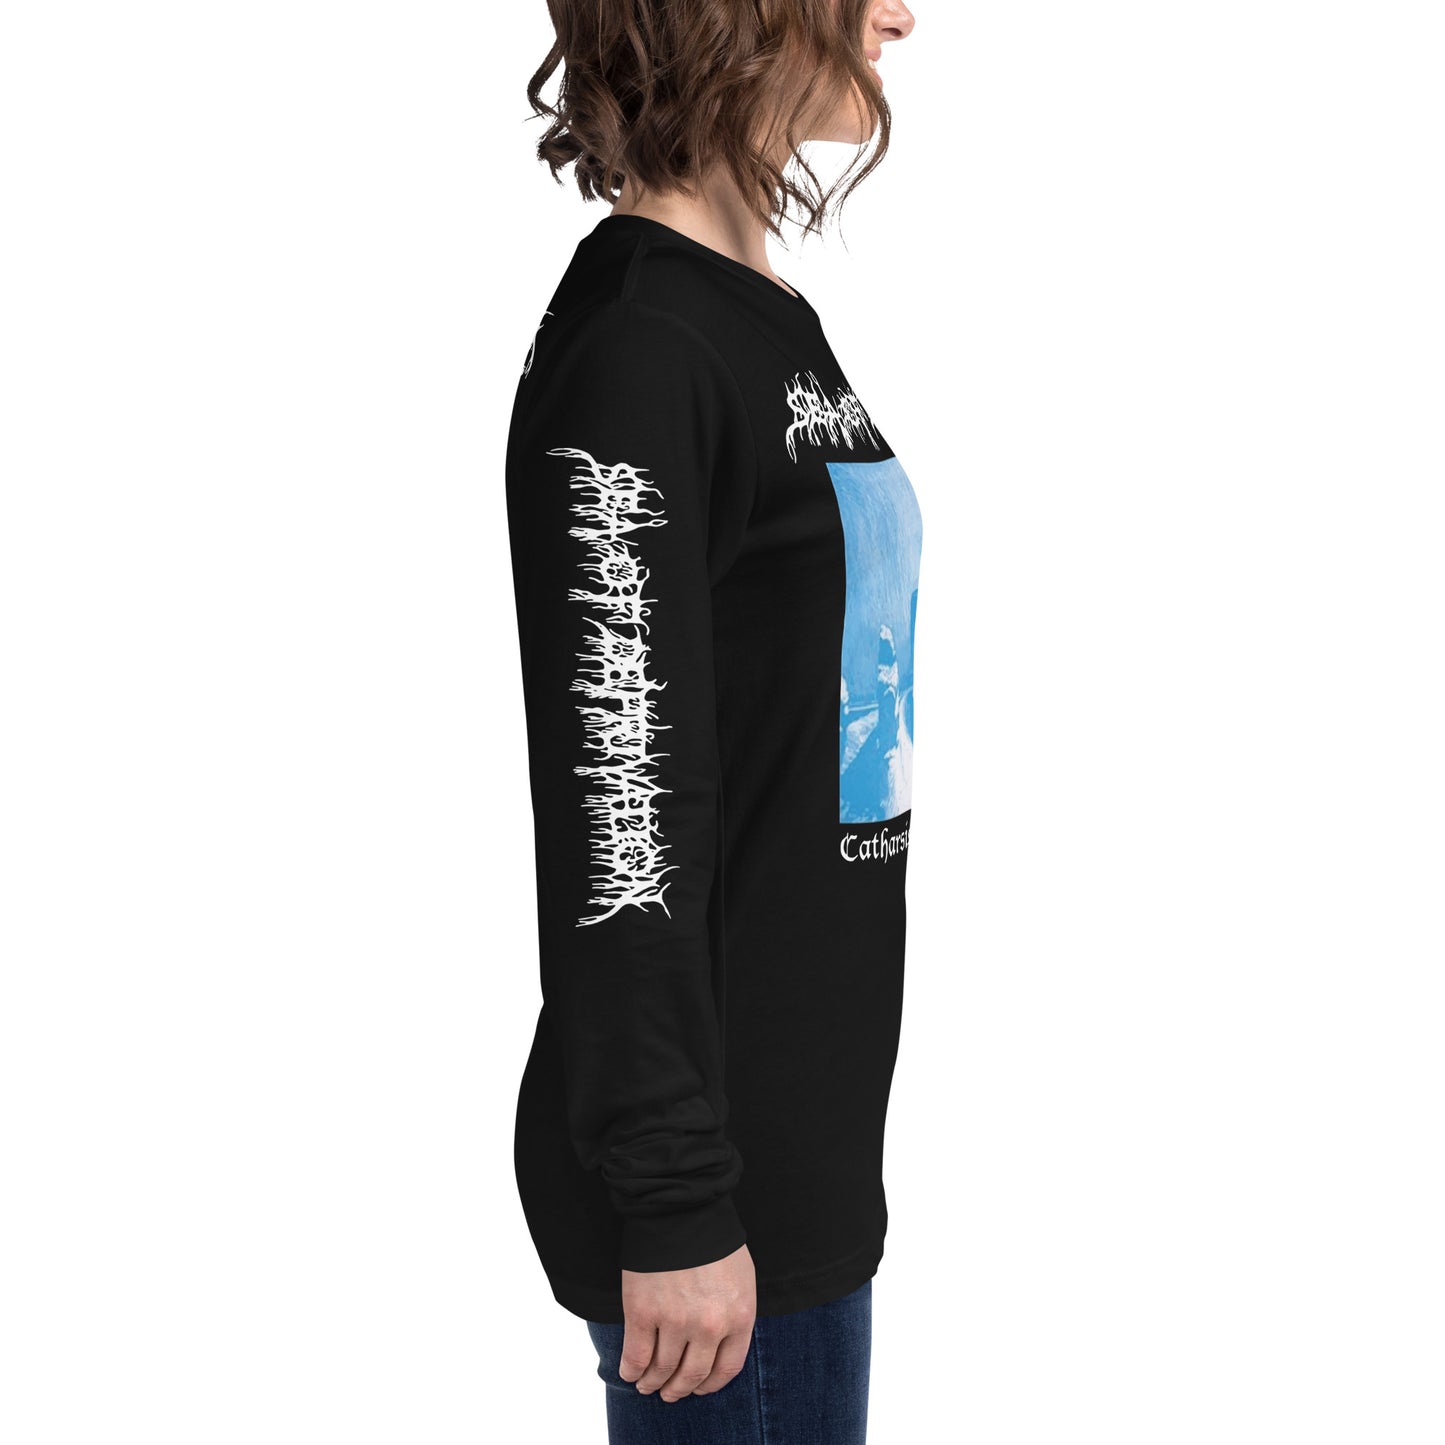 Sea Of Deprivation - Catharsis In Disharmony Long Sleeve T-Shirt